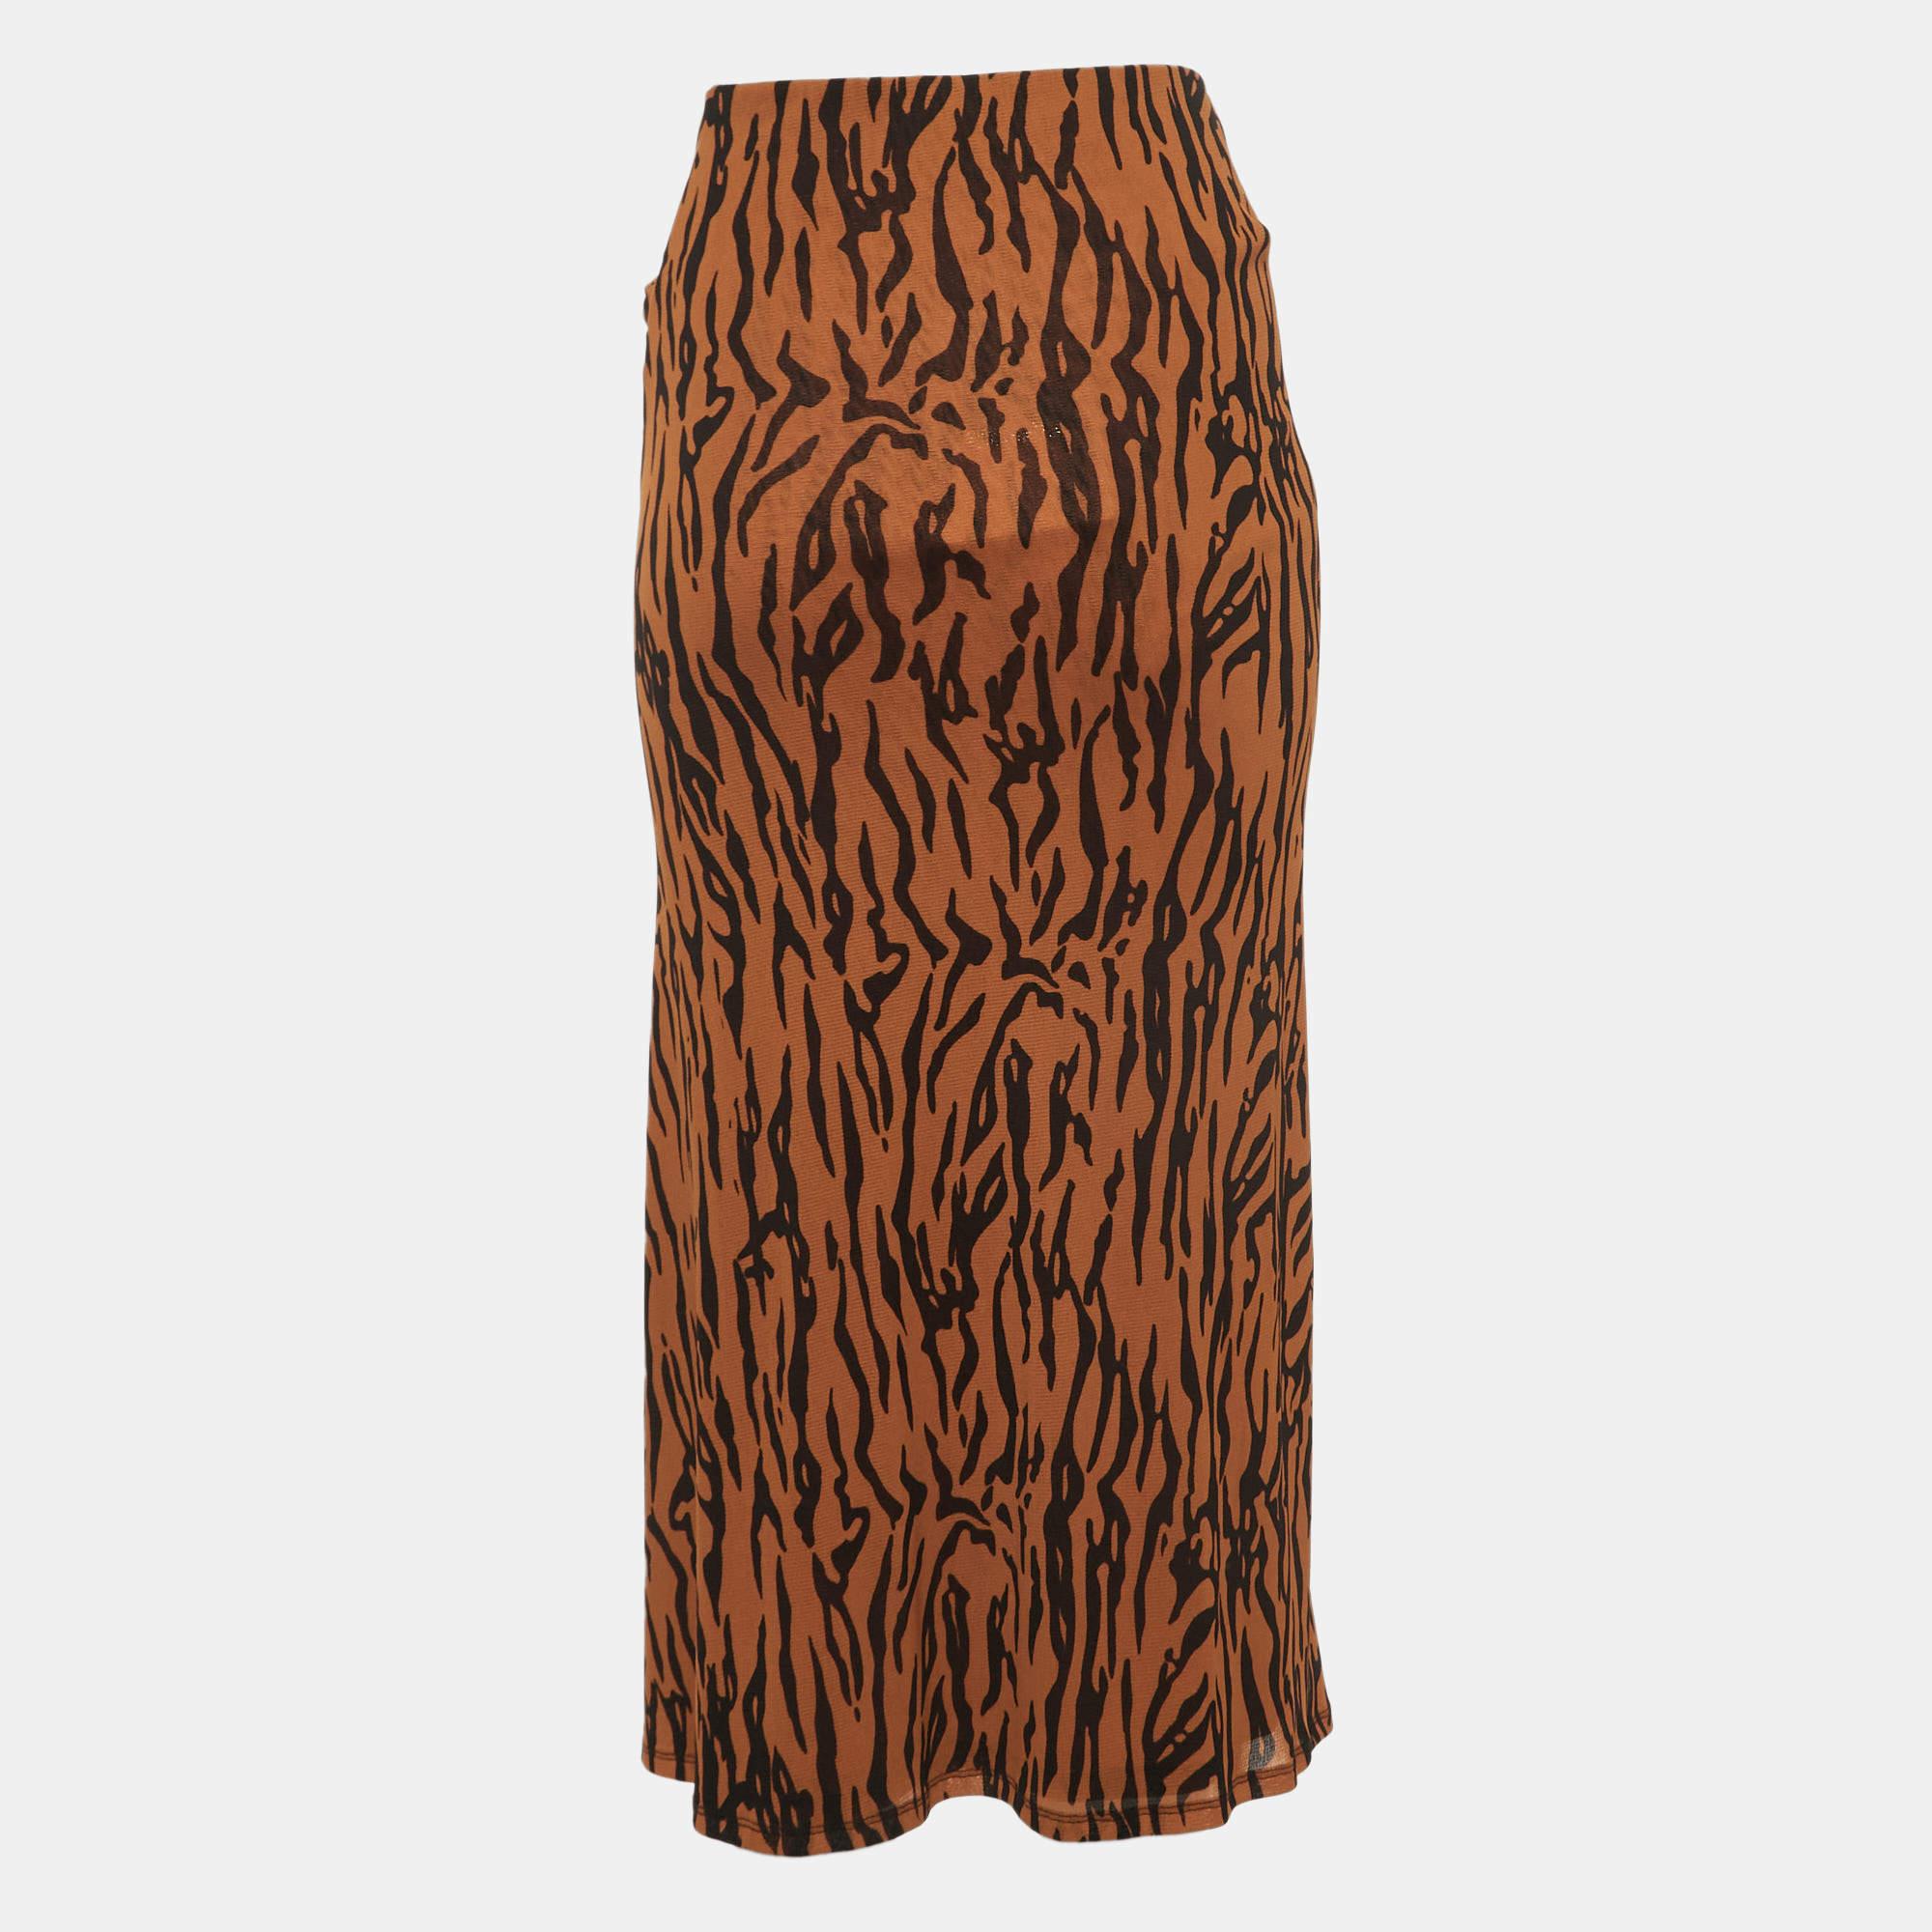 This elegant DVF skirt is worth adding to your closet! Crafted from fine materials, it is exquisitely designed into a flattering shape.

Includes: Brand Tag